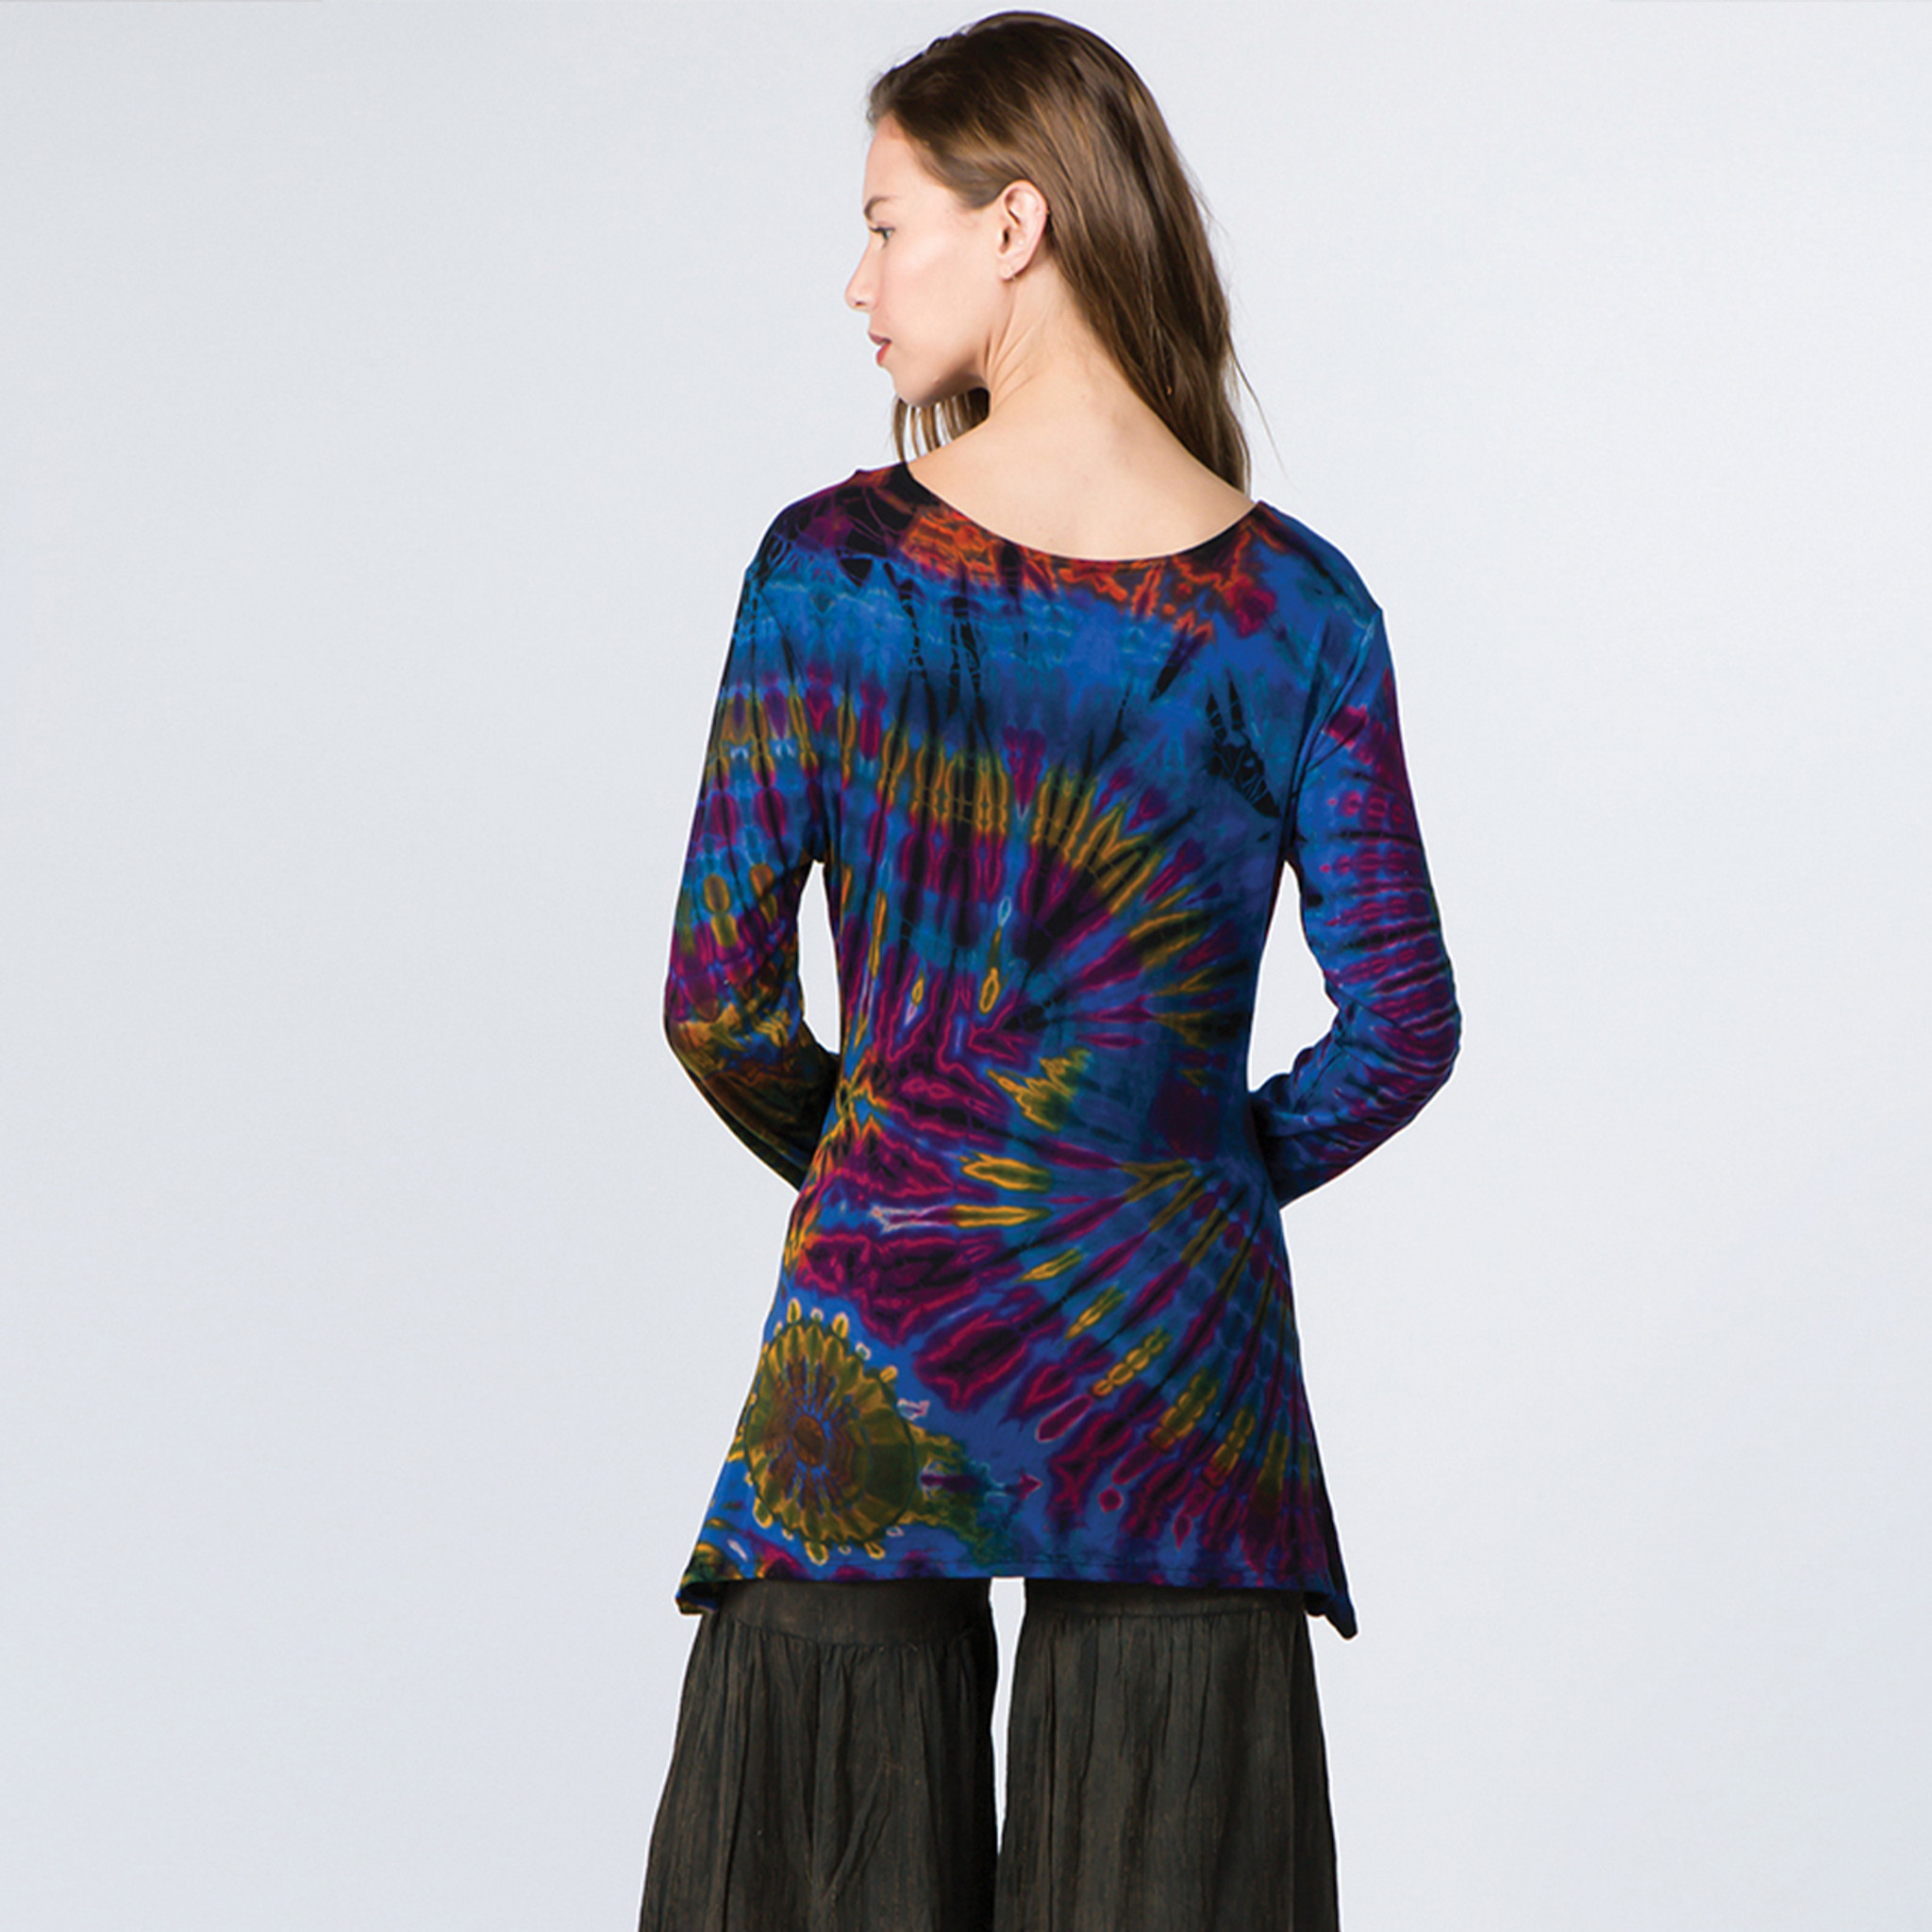 MYSTIC TOP Rayon Spandex Tie Dye Front Wrap Long Sleeve Angle Cut Top